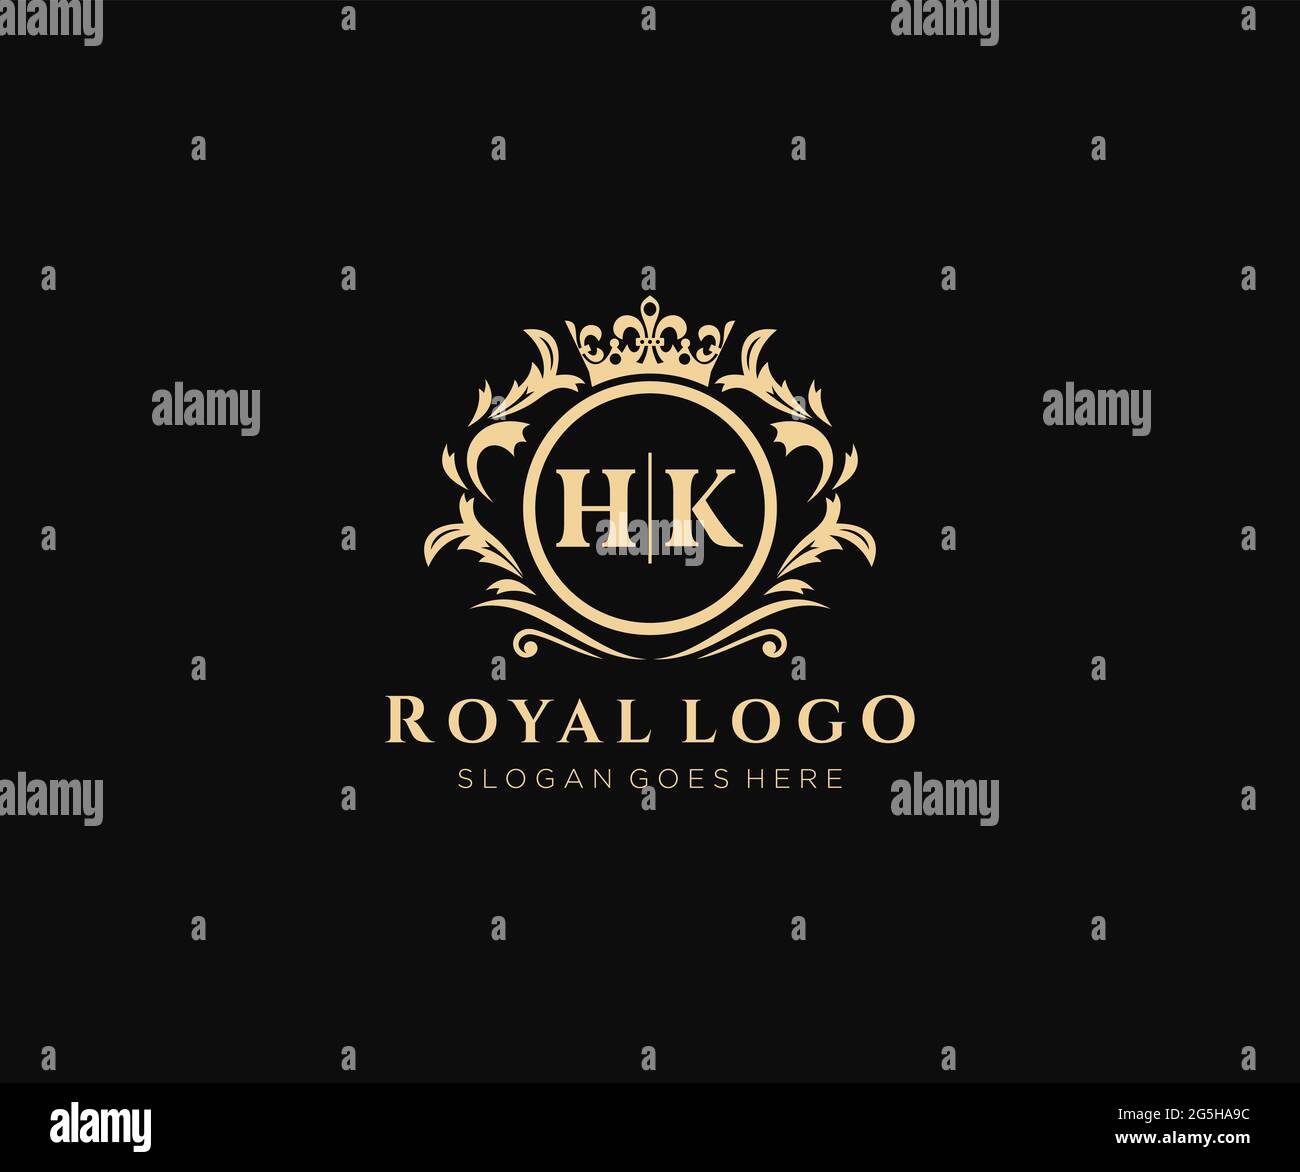 HK Letter Luxurious Brand Logo Template, for Restaurant, Royalty, Boutique, Cafe, Hotel, Heraldic, Jewelry, Fashion and other vector illustration. Stock Vector